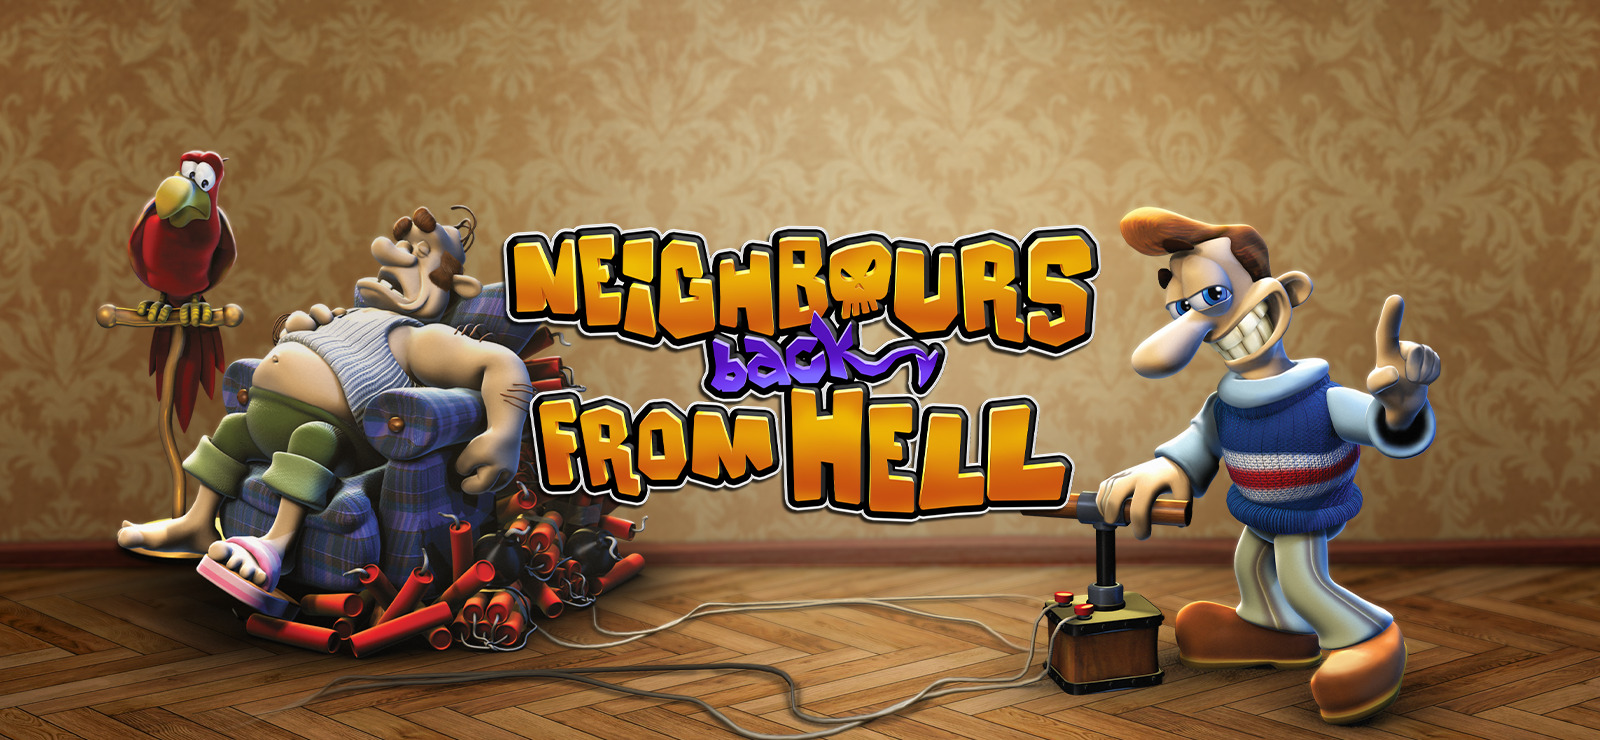 Neighbours back From Hell for Nintendo Switch - Nintendo Official Site